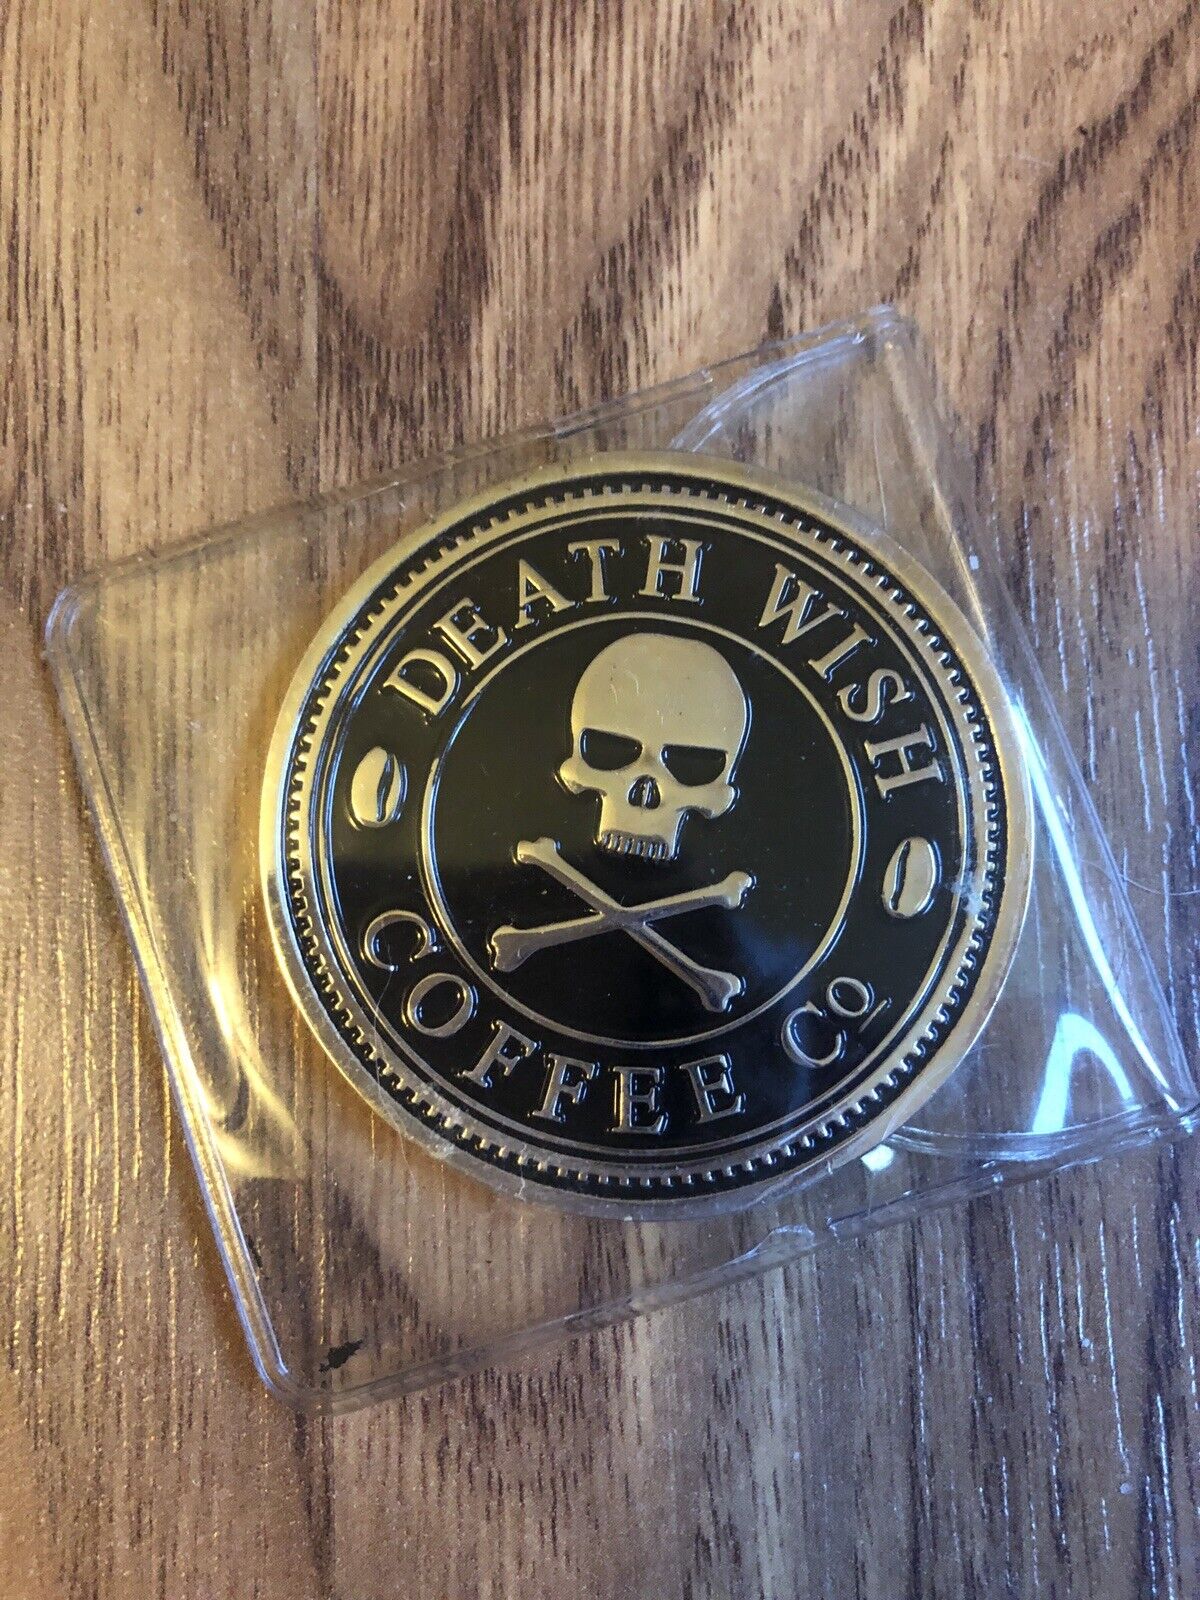 Death Wish Coffee Challenge Coin Society Of Strong Coffee + Sticker